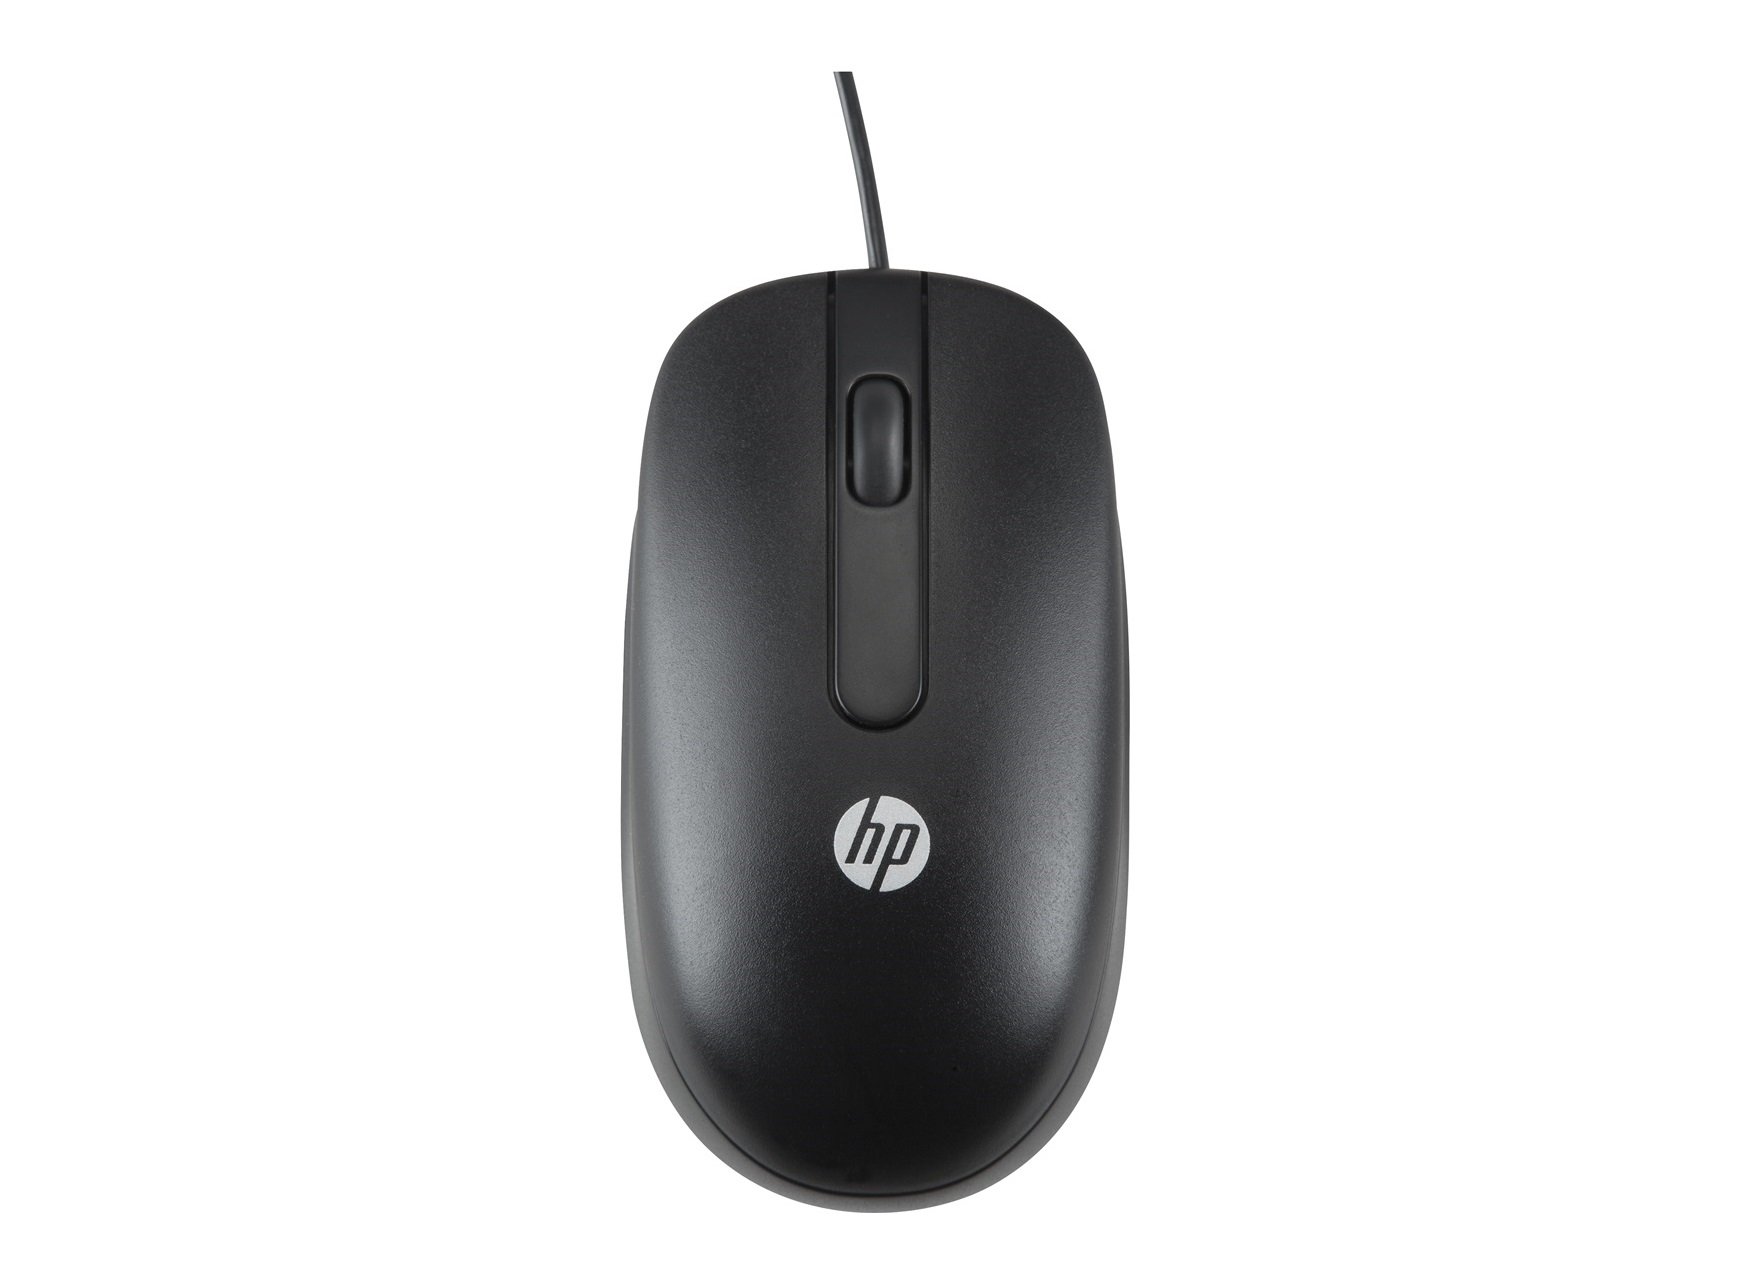 Sandstorm longlife hyper scroll mouse with auto dpi smwlhyp15